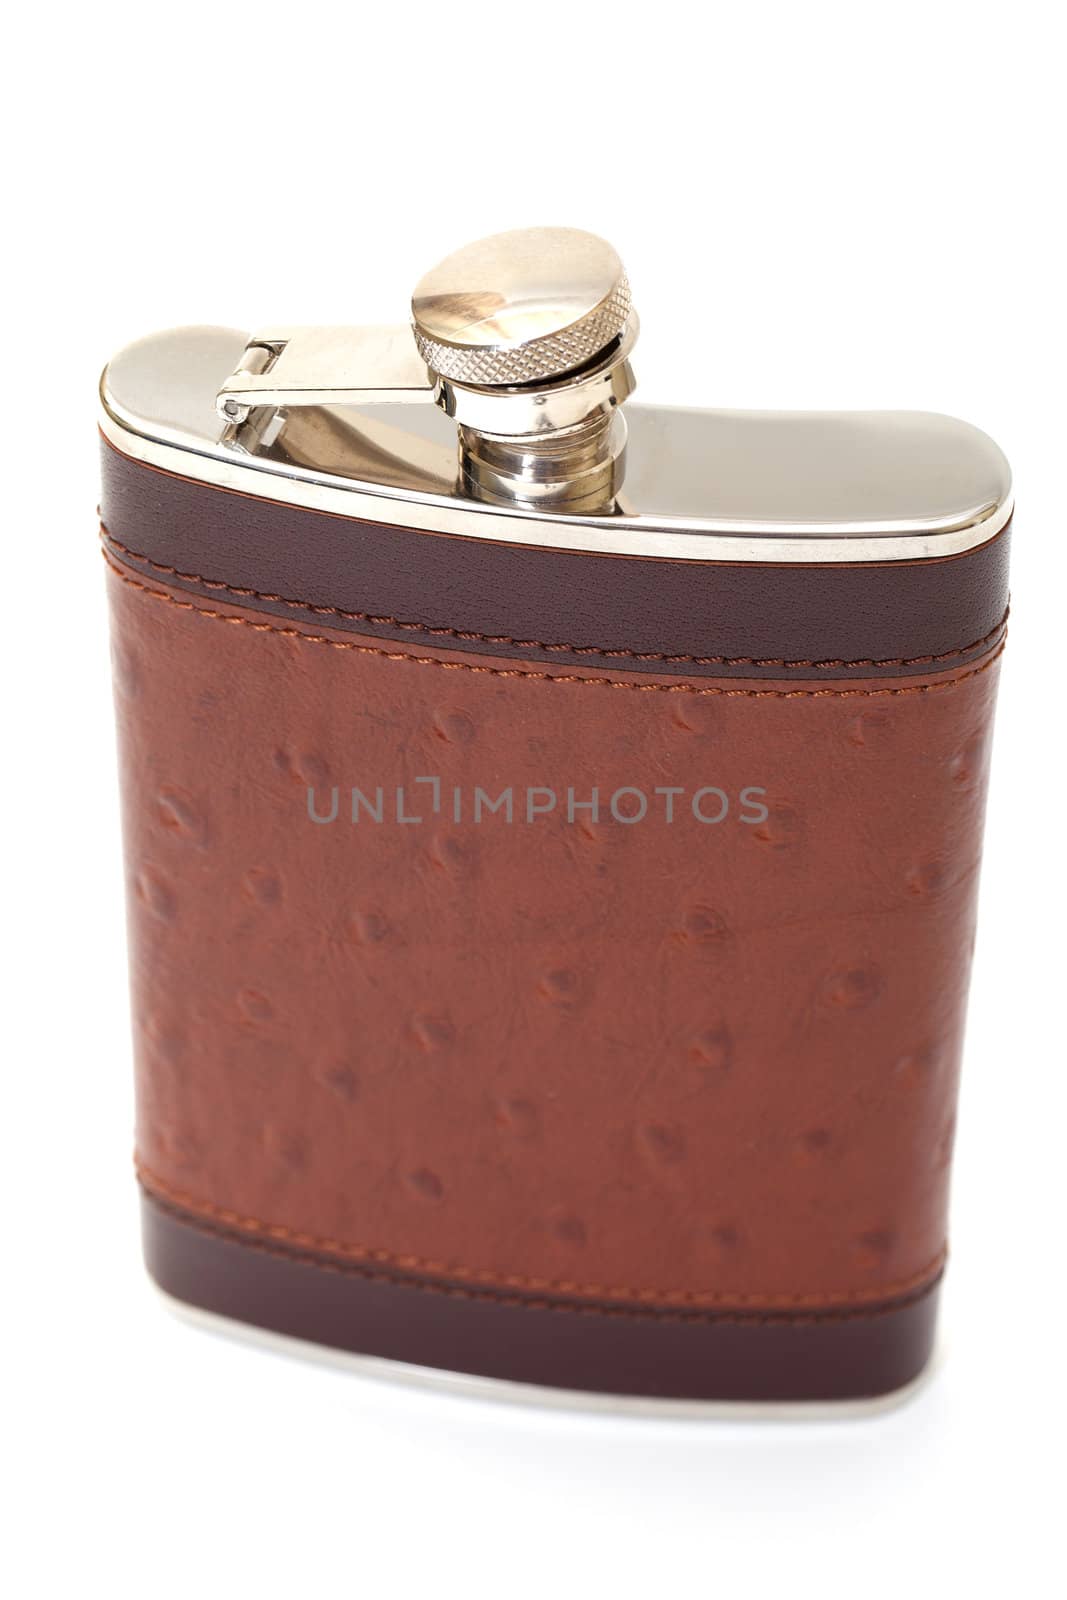 Hip flask by Discovod